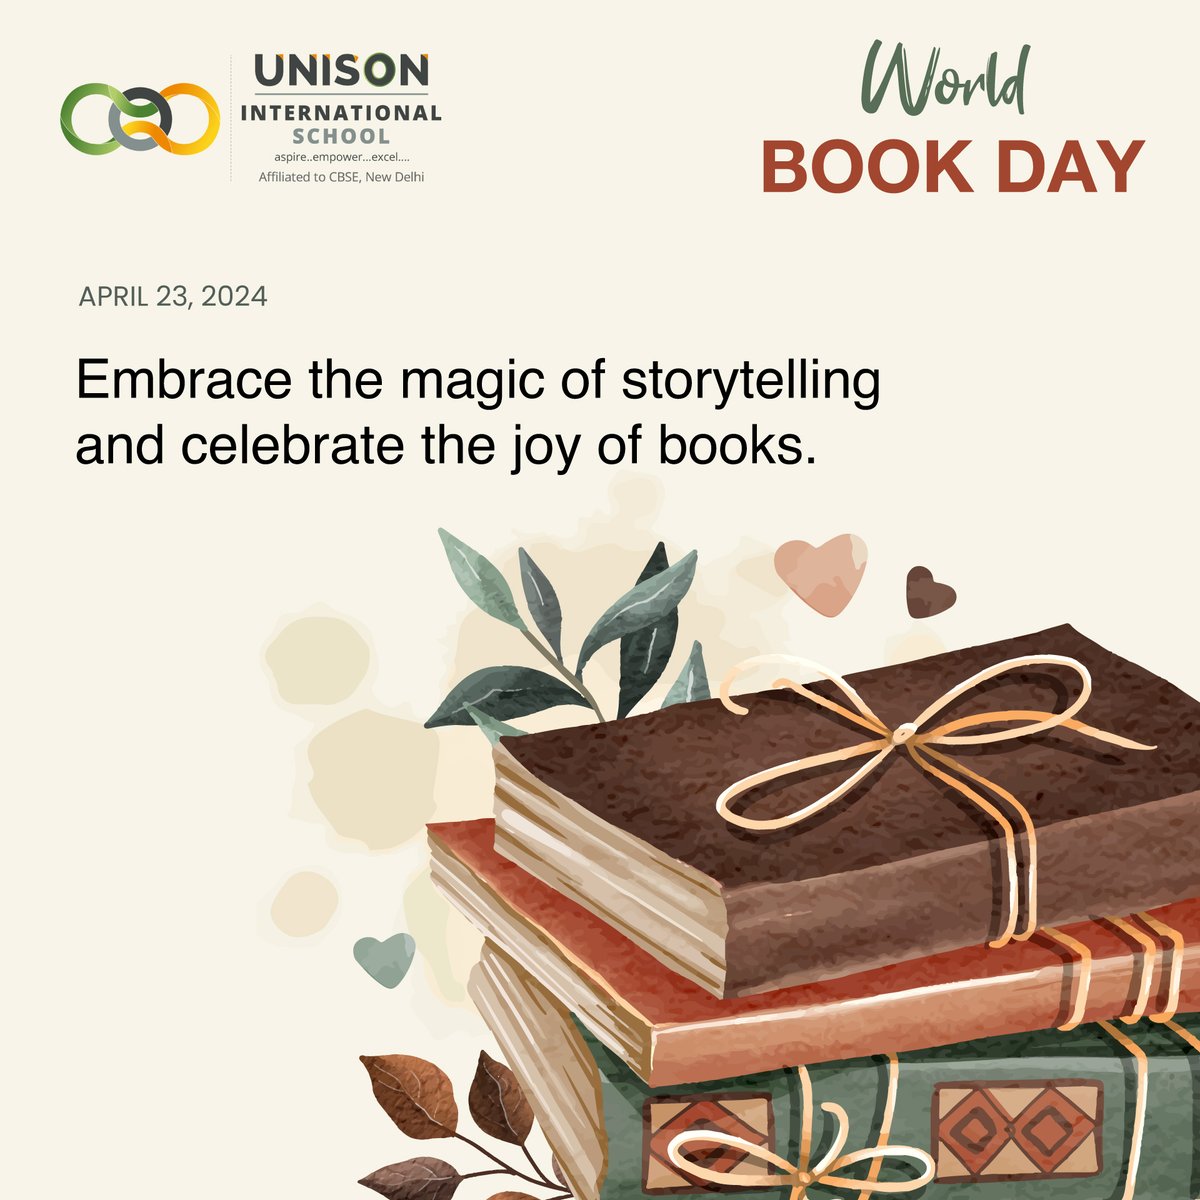 World Book Day celebrates the universal language of books that transcends borders, cultures, and languages. Today, let's appreciate the beauty of literature as a shared experience that unites us all📚✨

#WorldBookDay #UnisonInternationalSchool #Excellence #Academics